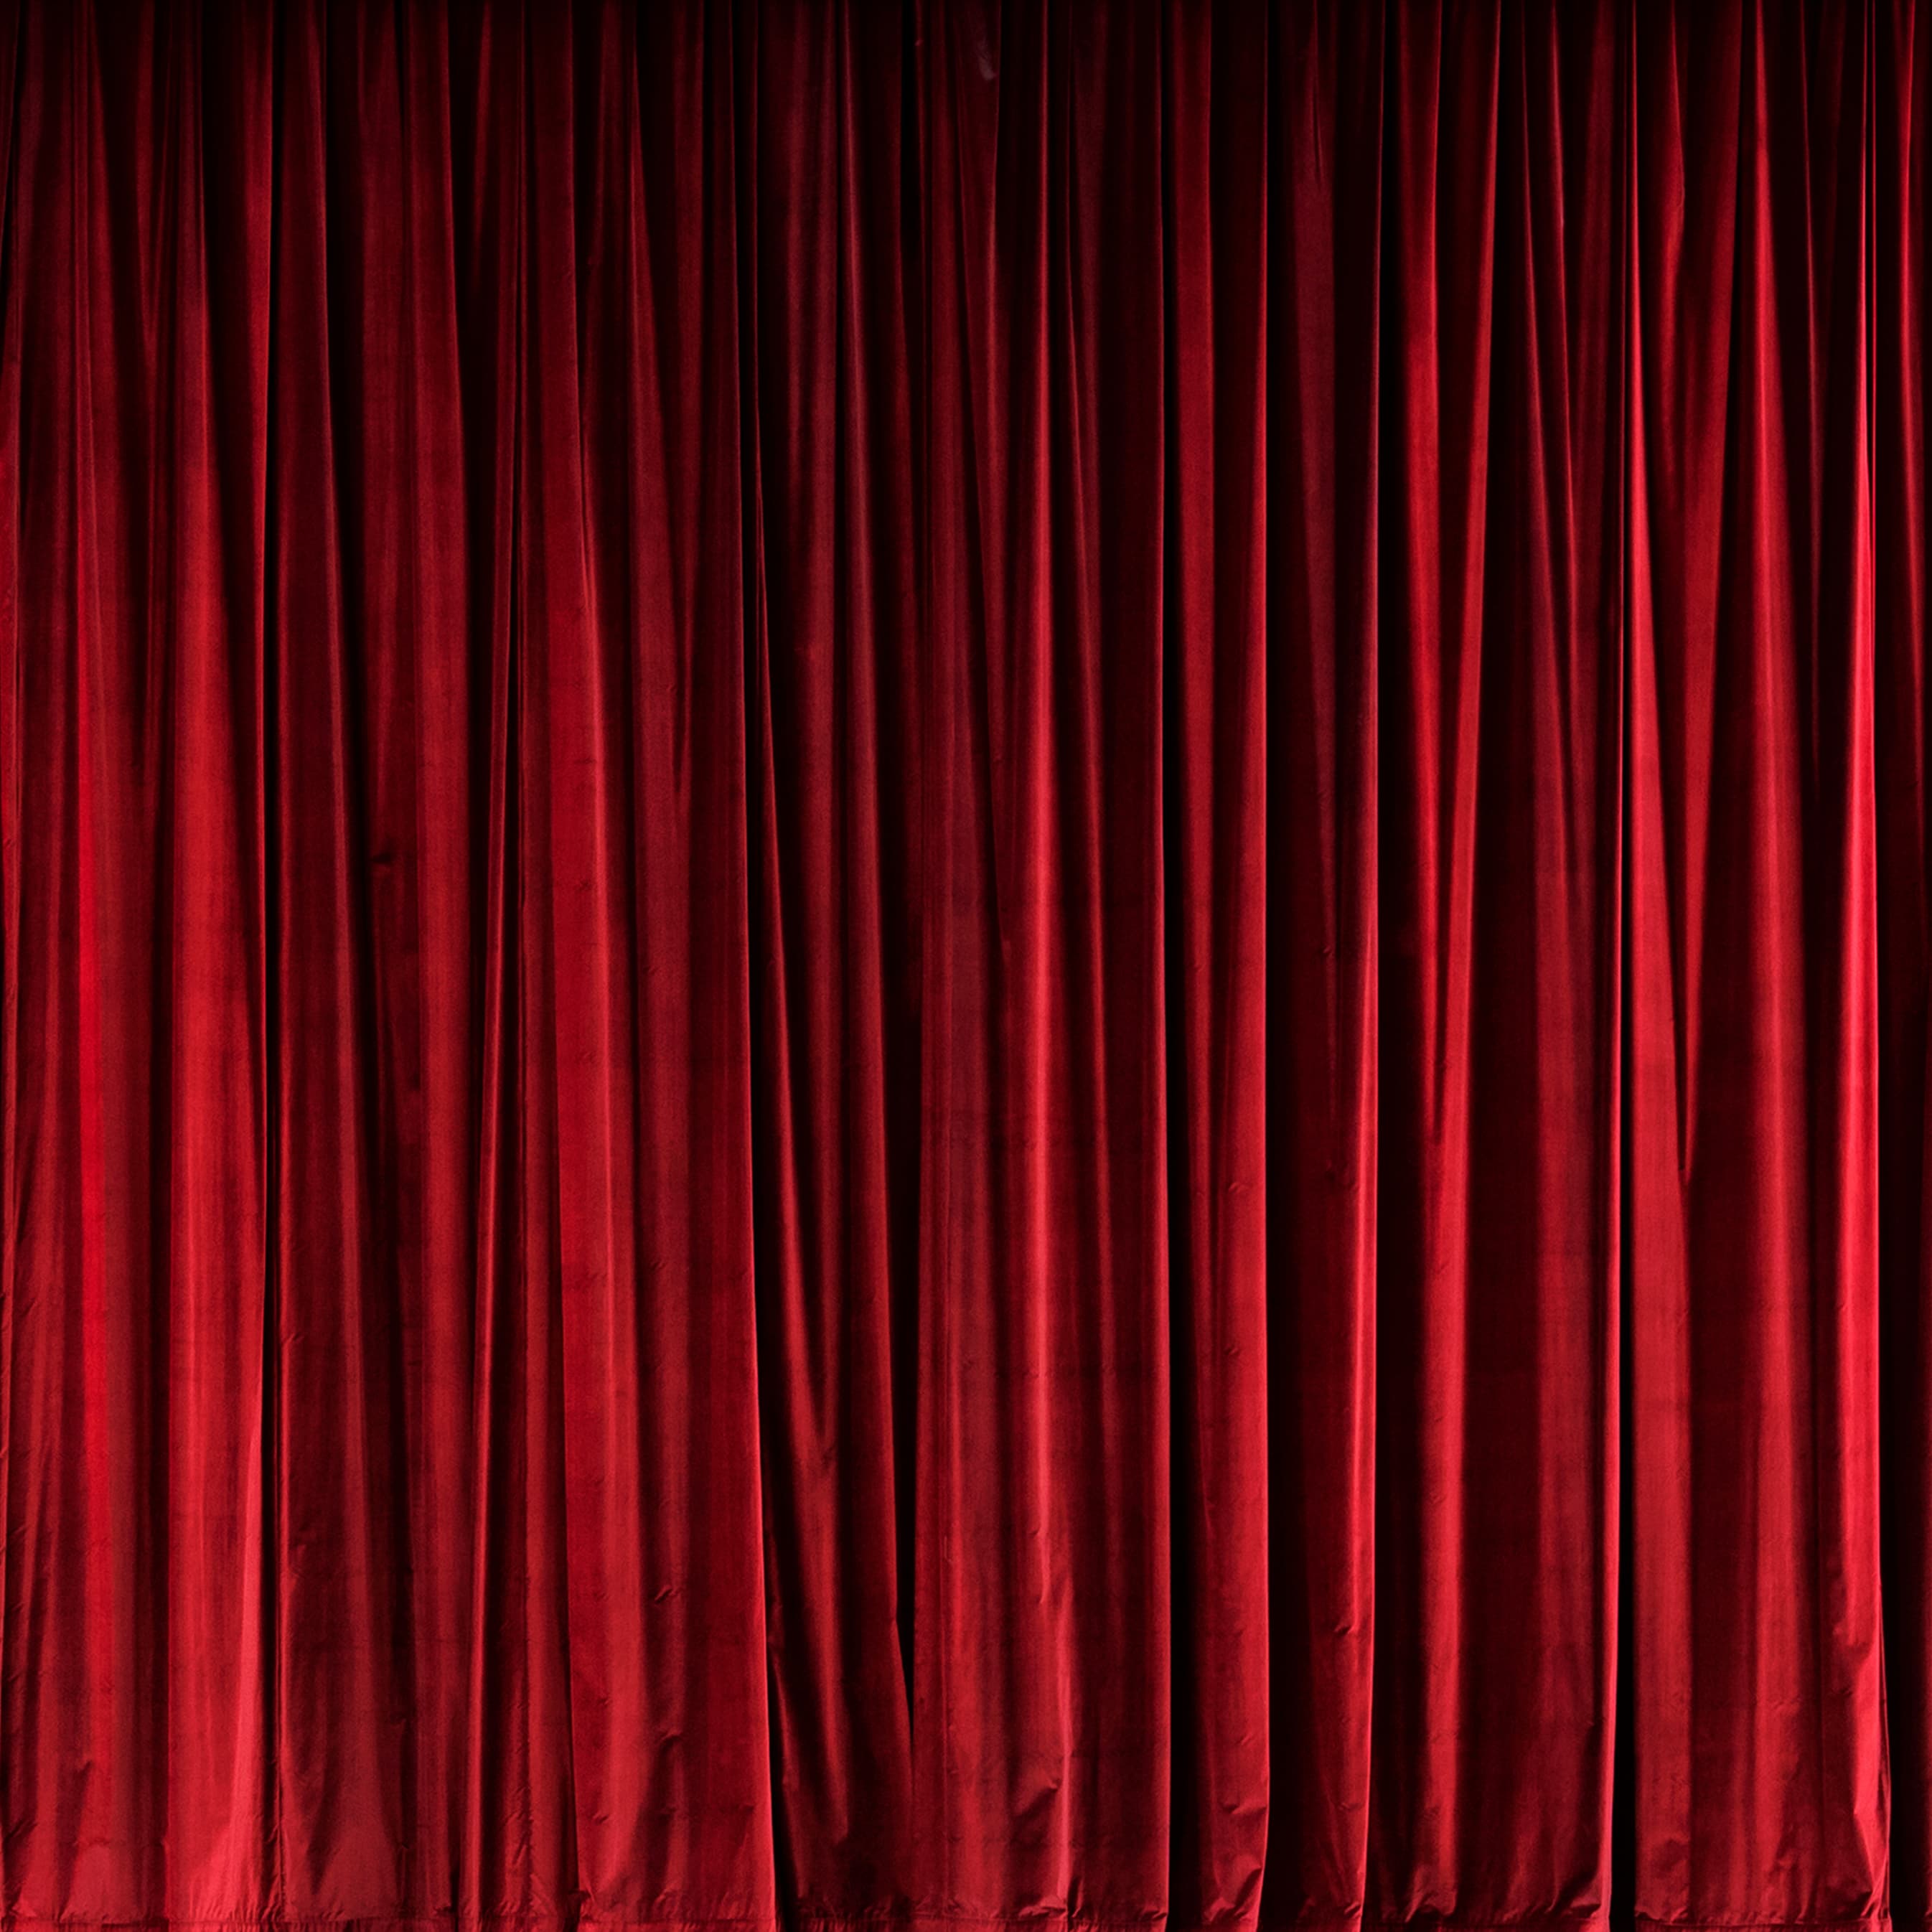 Looking for something fun to do tonight? Get your tickets for the best live shows in London: theater, stand-up comedy, musicals, magic, and much more.